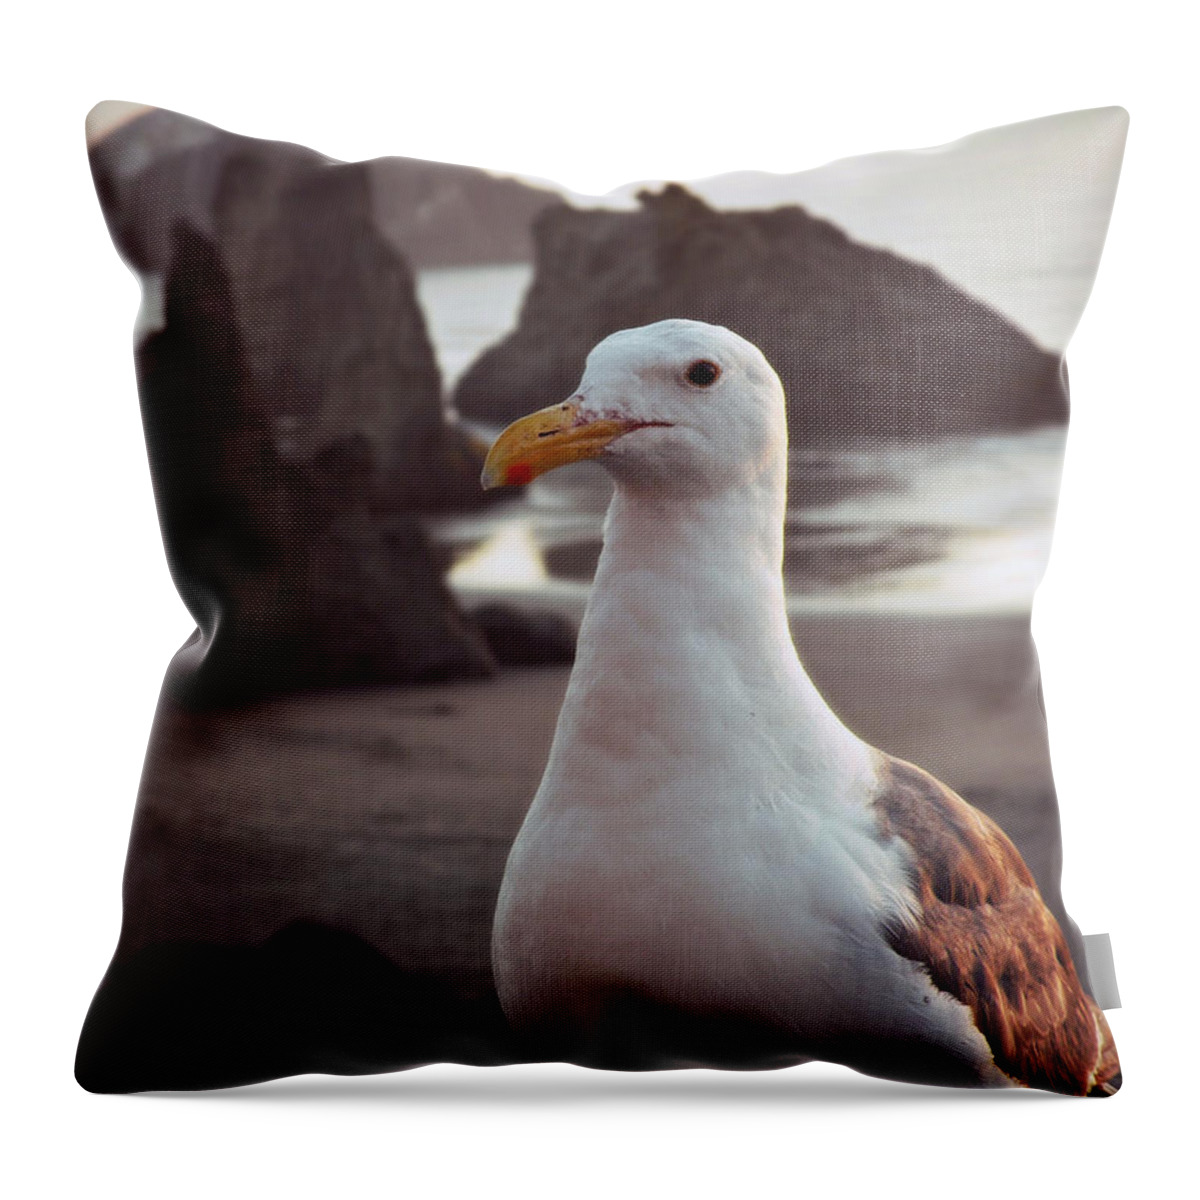 Waiting For A Handout Throw Pillow featuring the photograph Waiting For A Handout by Micki Findlay